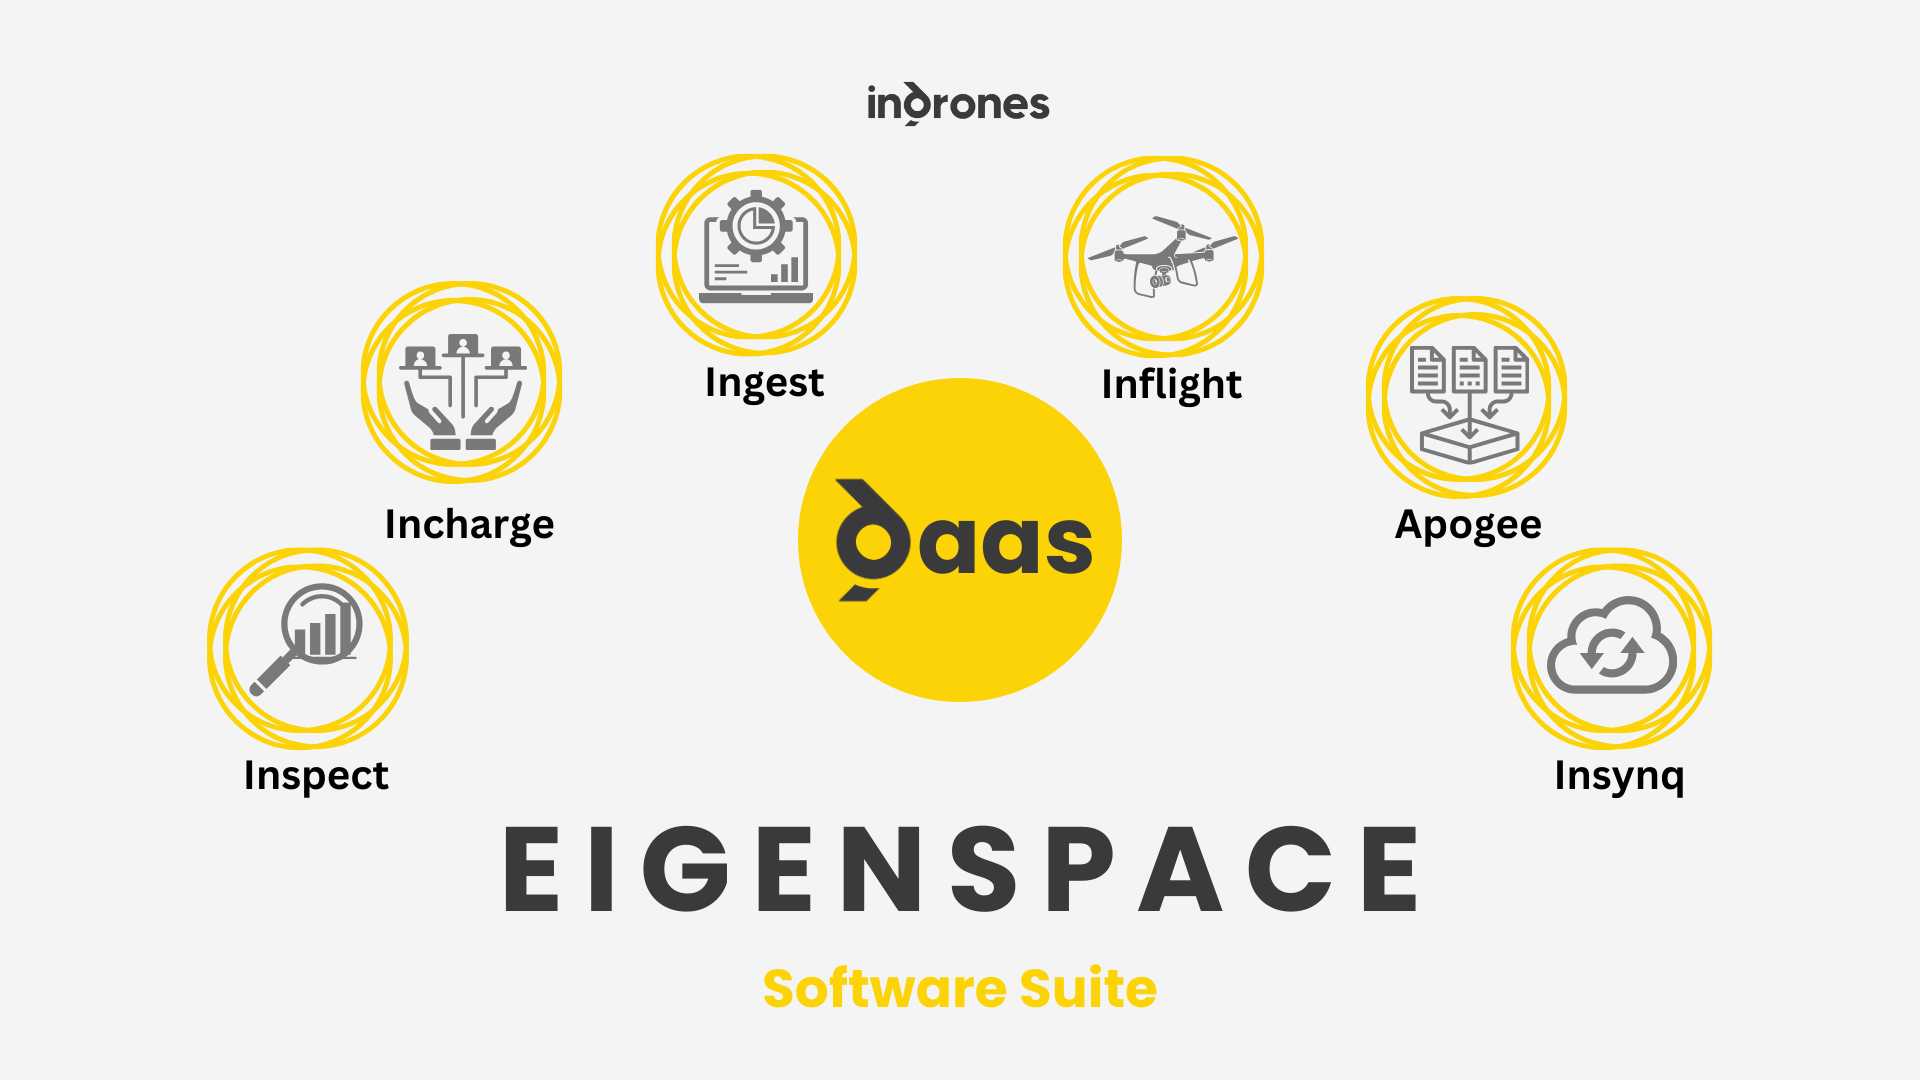 Image showing Eigenspace, A software suite developed by Indrones that offers Project Management, Data Collection, Data Processing, Data visualization and analysis.
            